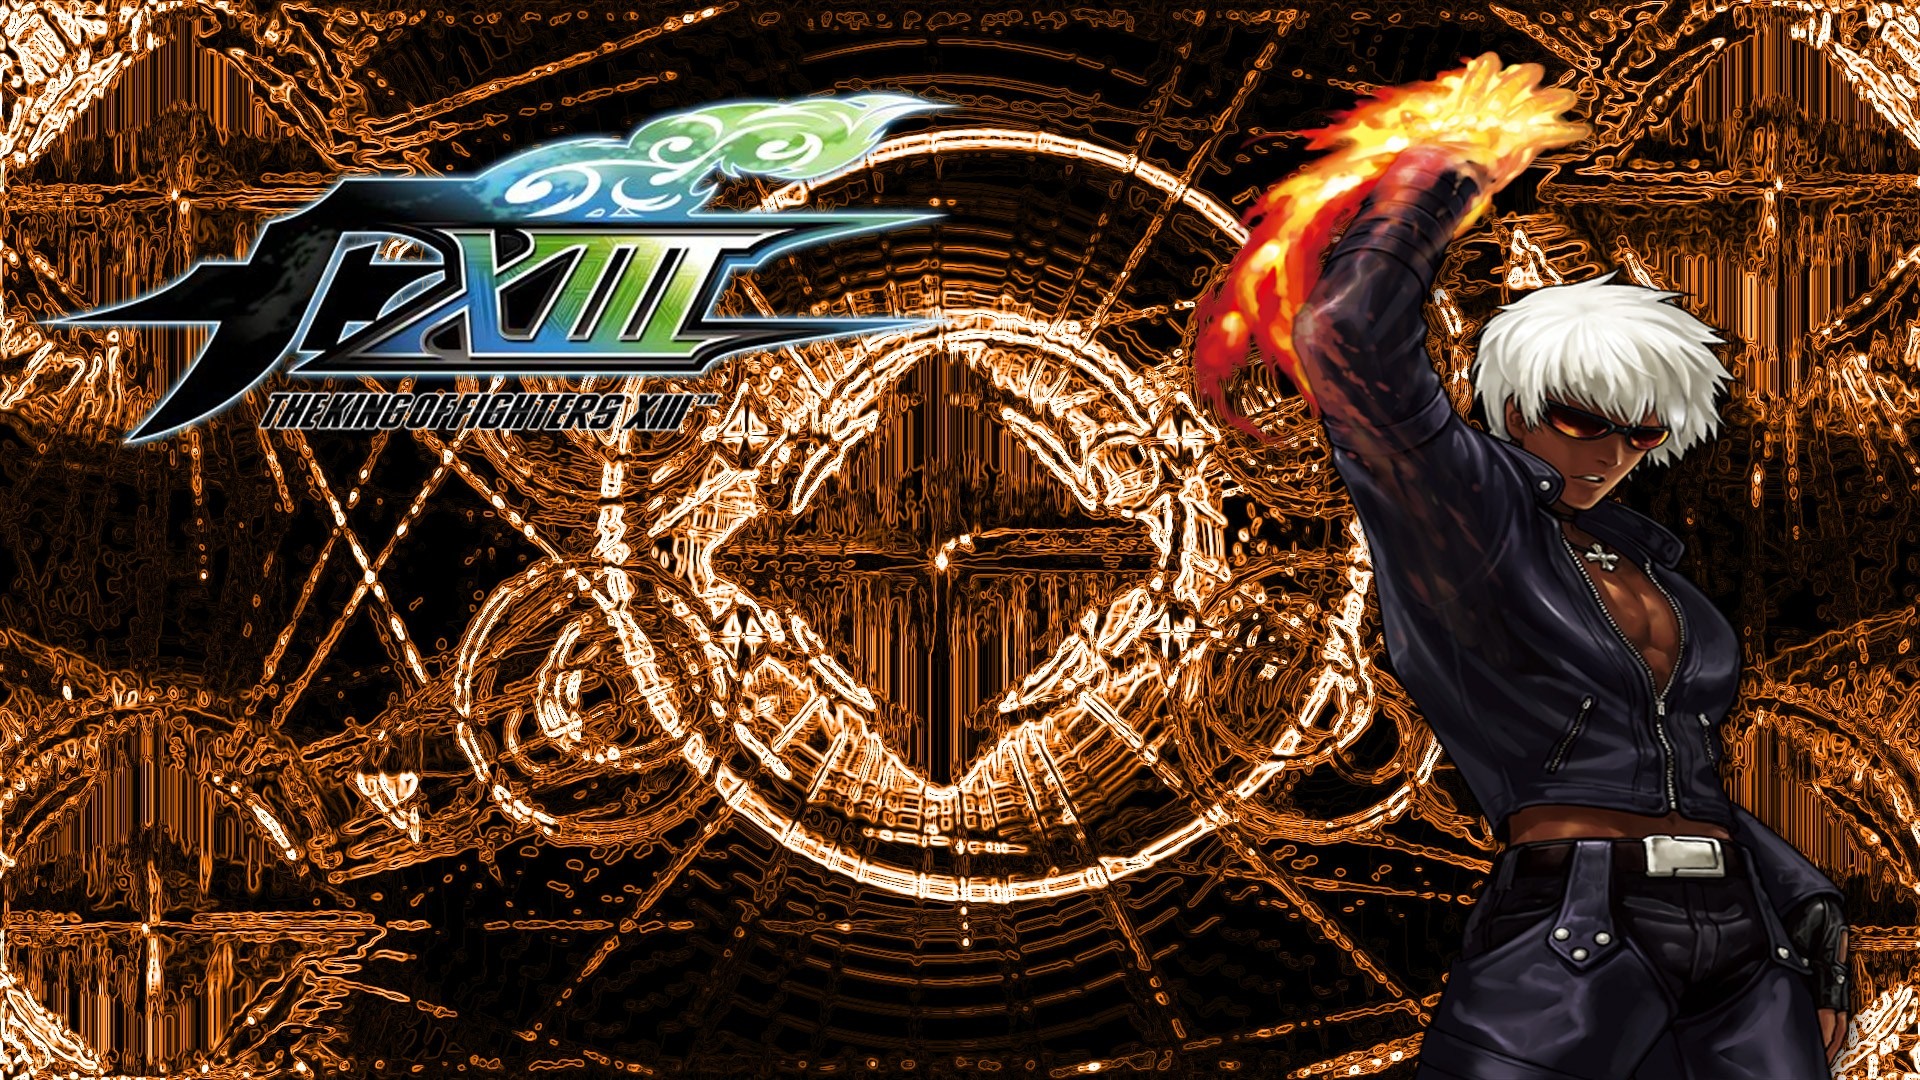 The King of Fighters XIII wallpapers #8 - 1920x1080